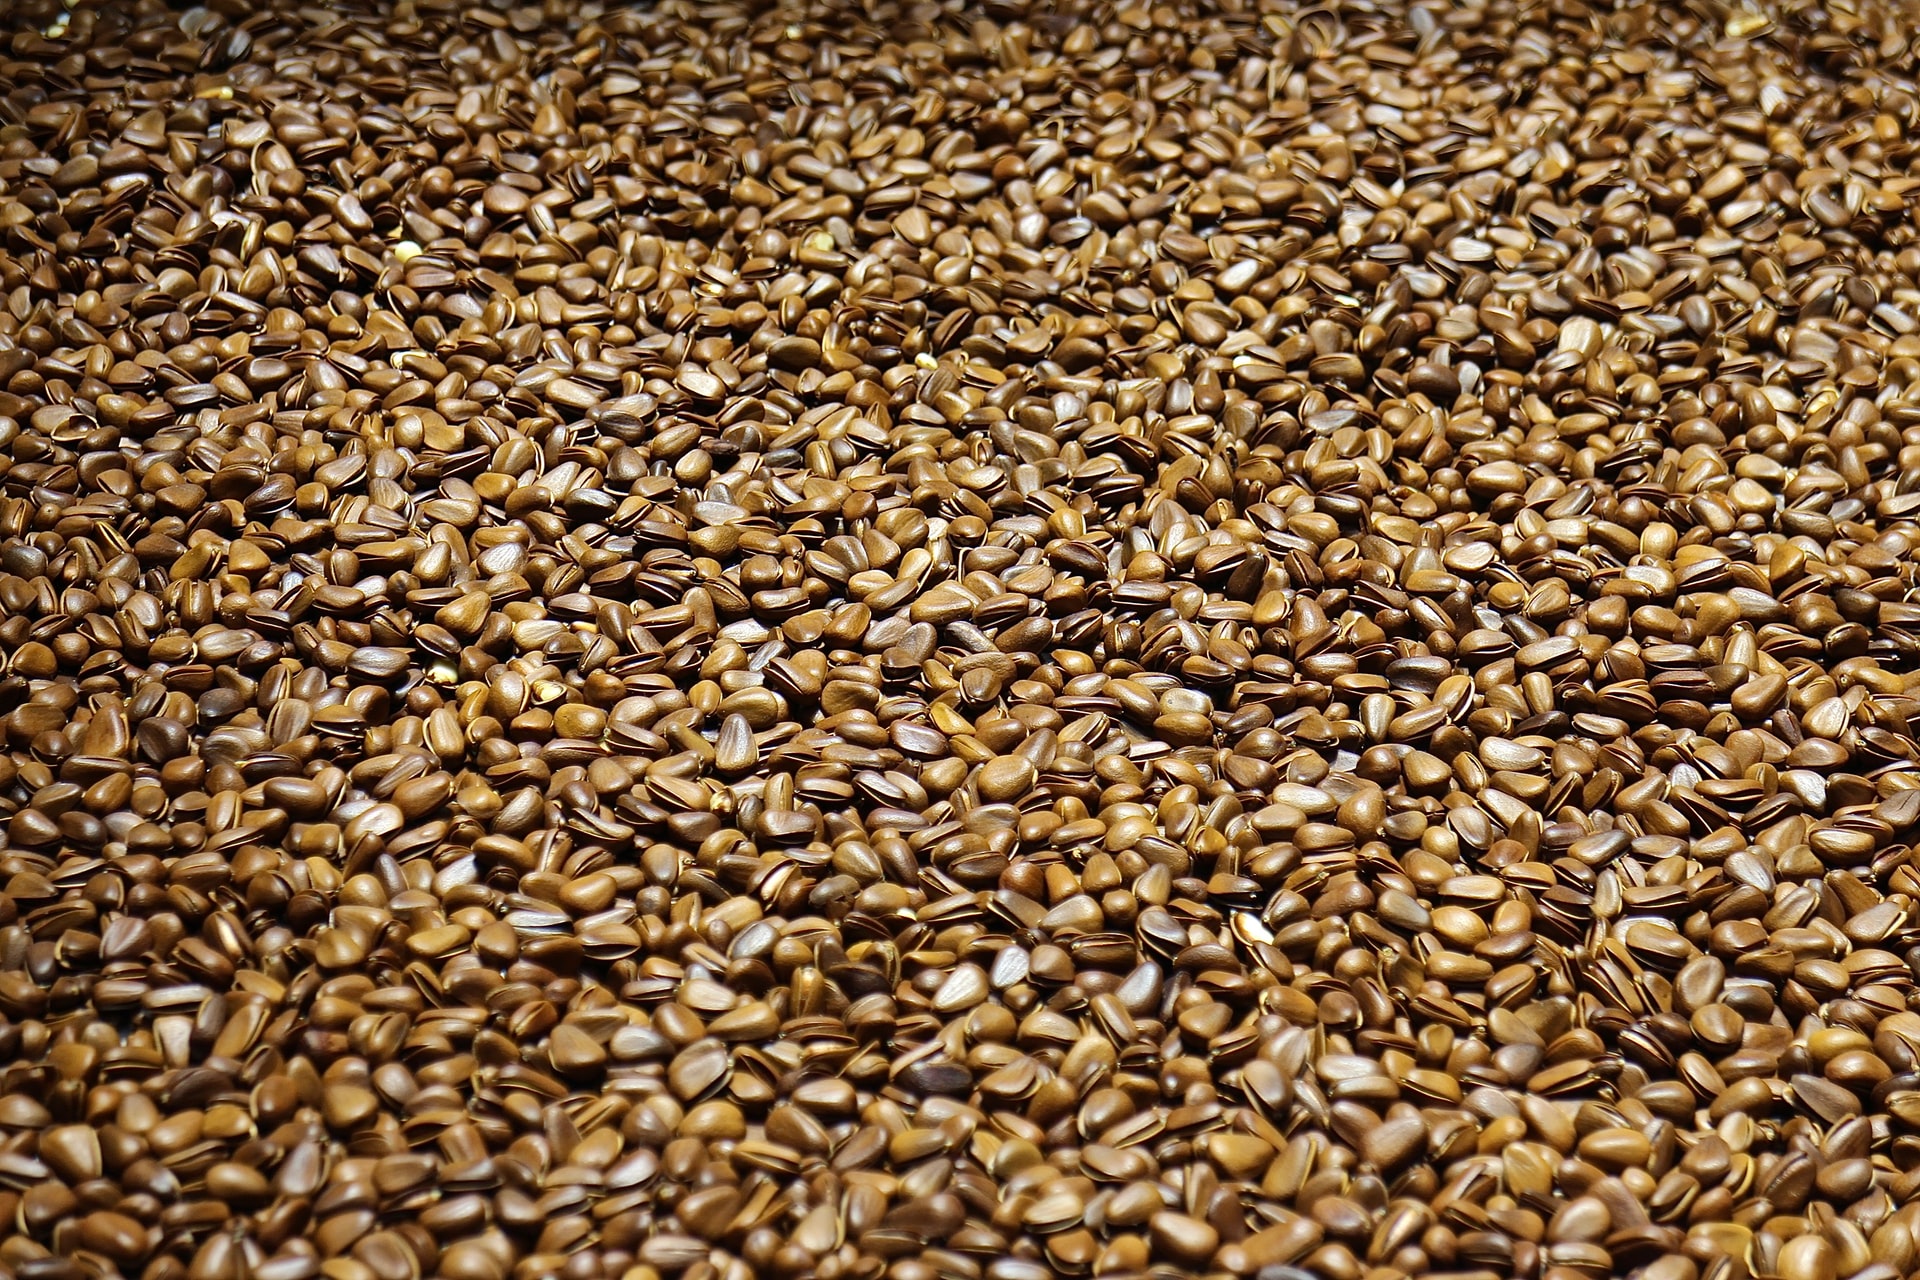 Flax Seeds are Plant-Based Sources Of Omega 3